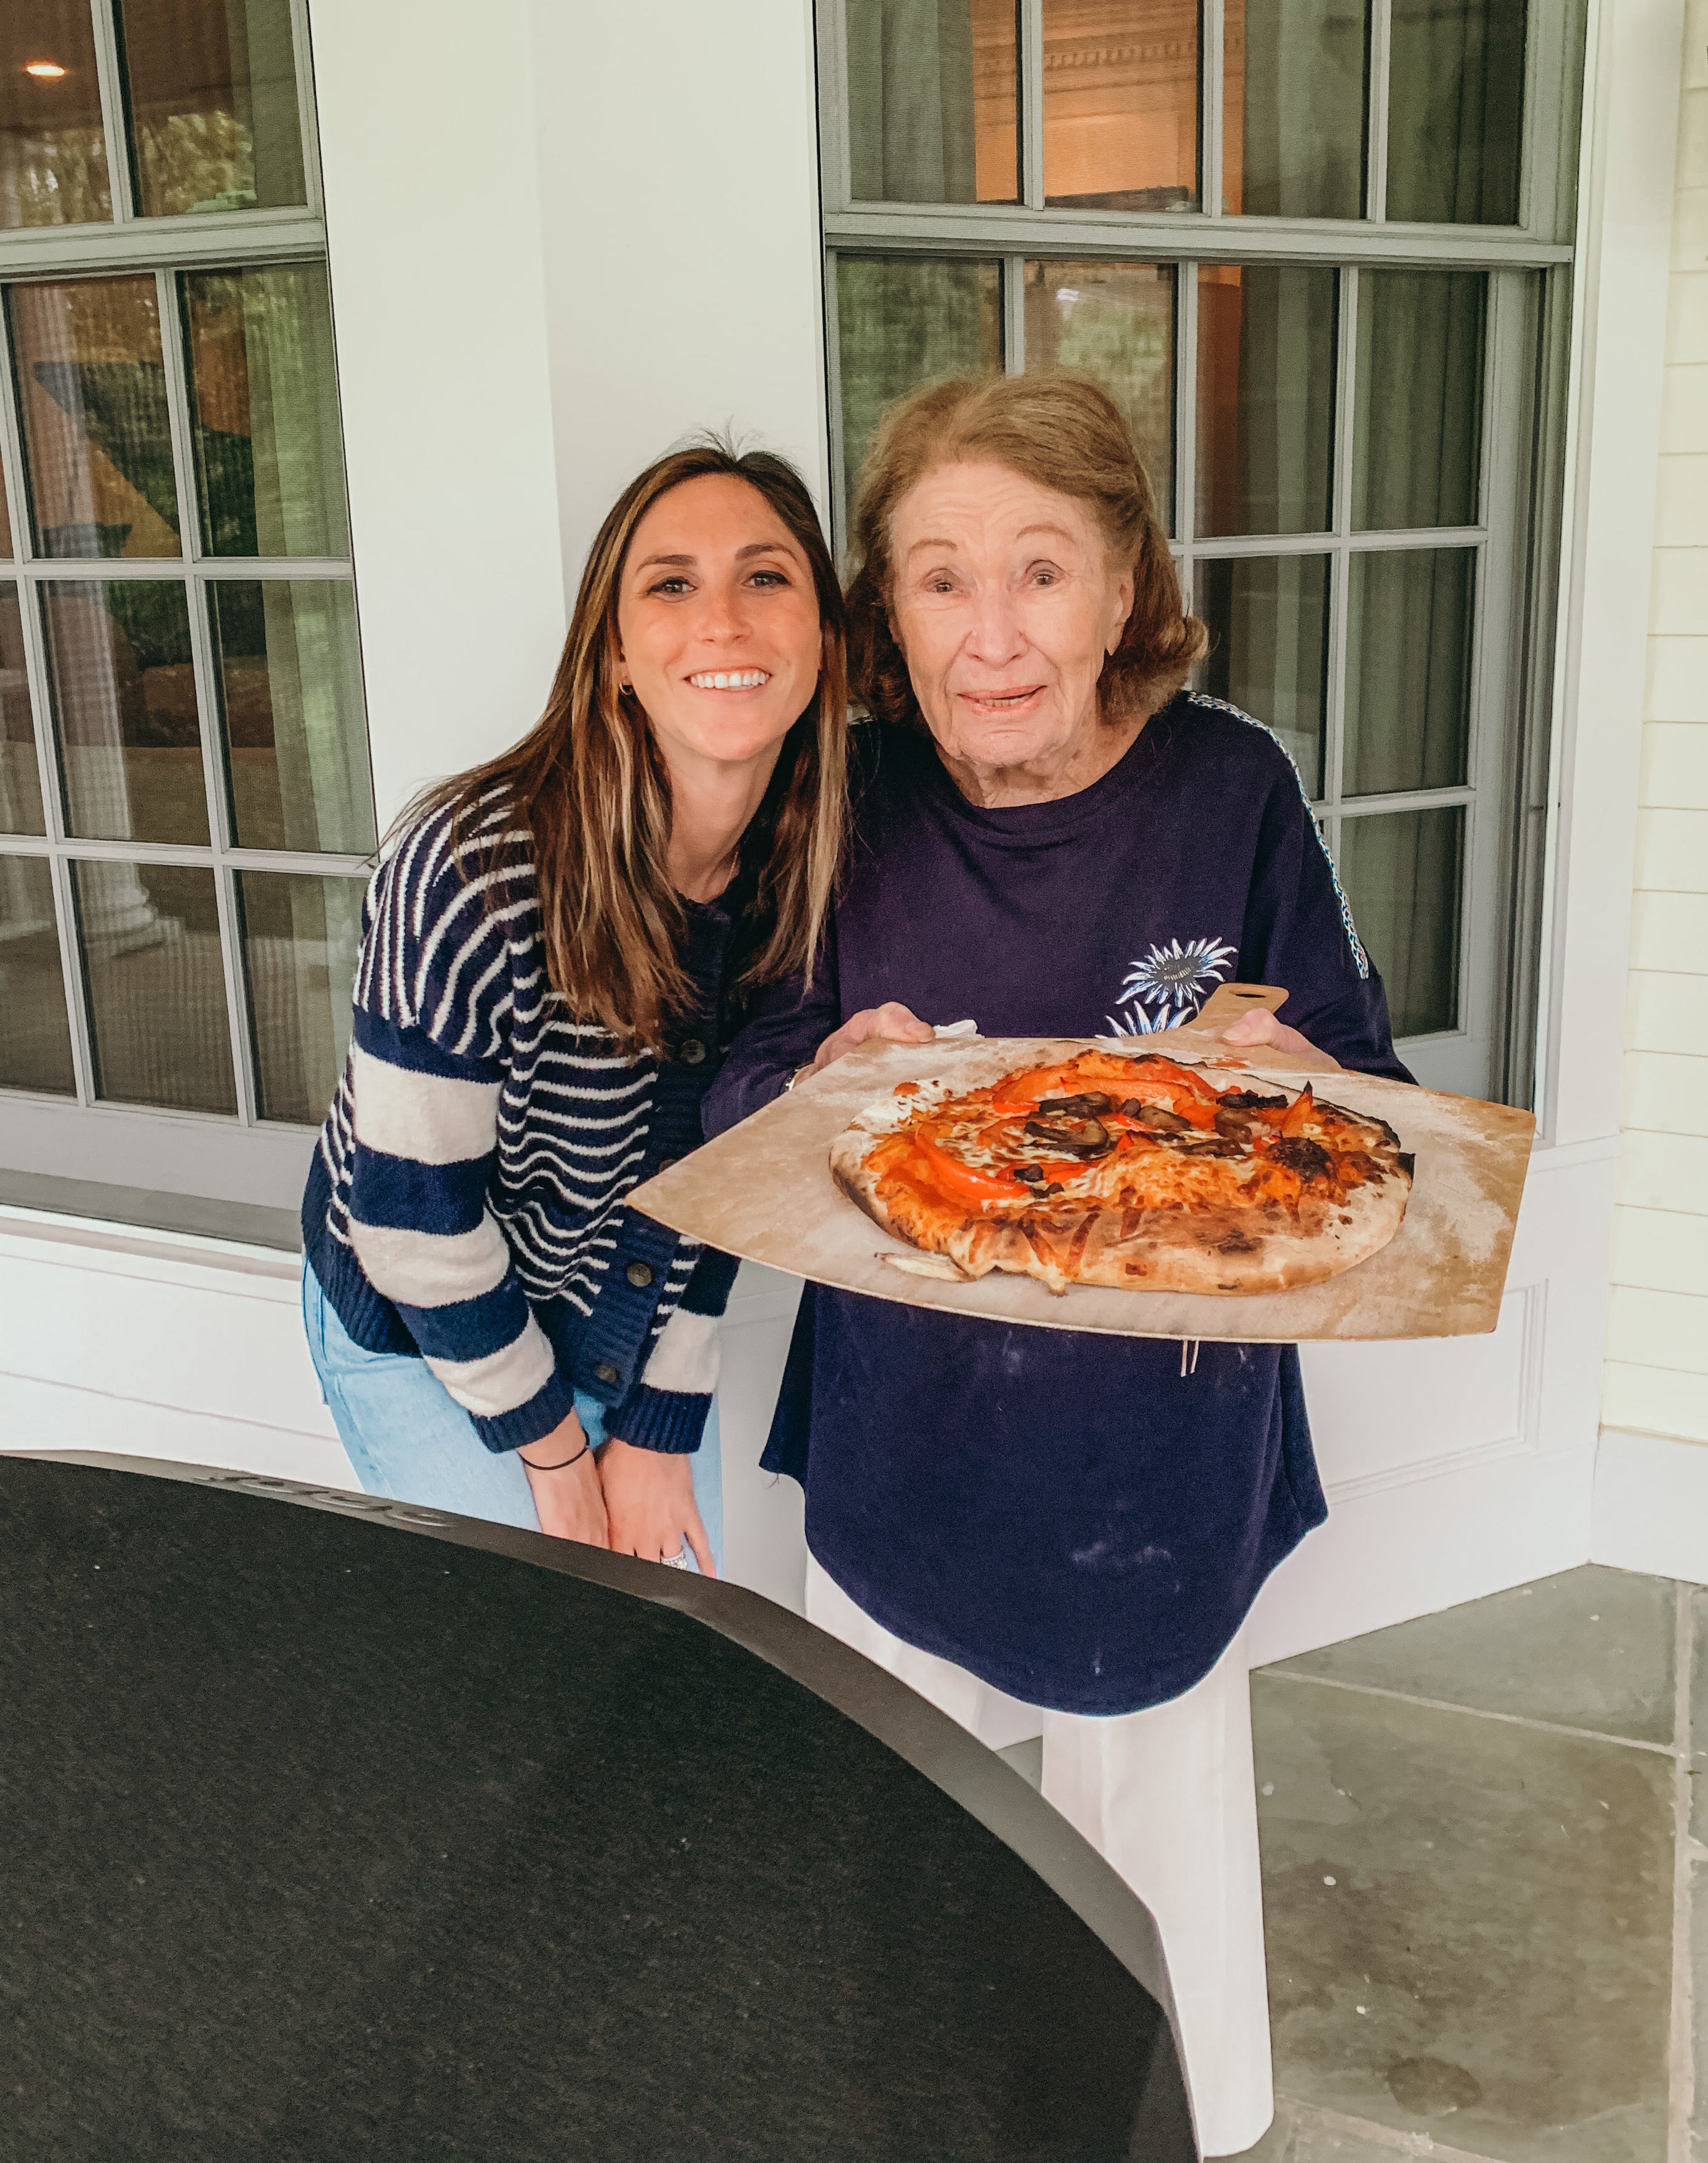 Me and my grandmother smiling with her pizza pie